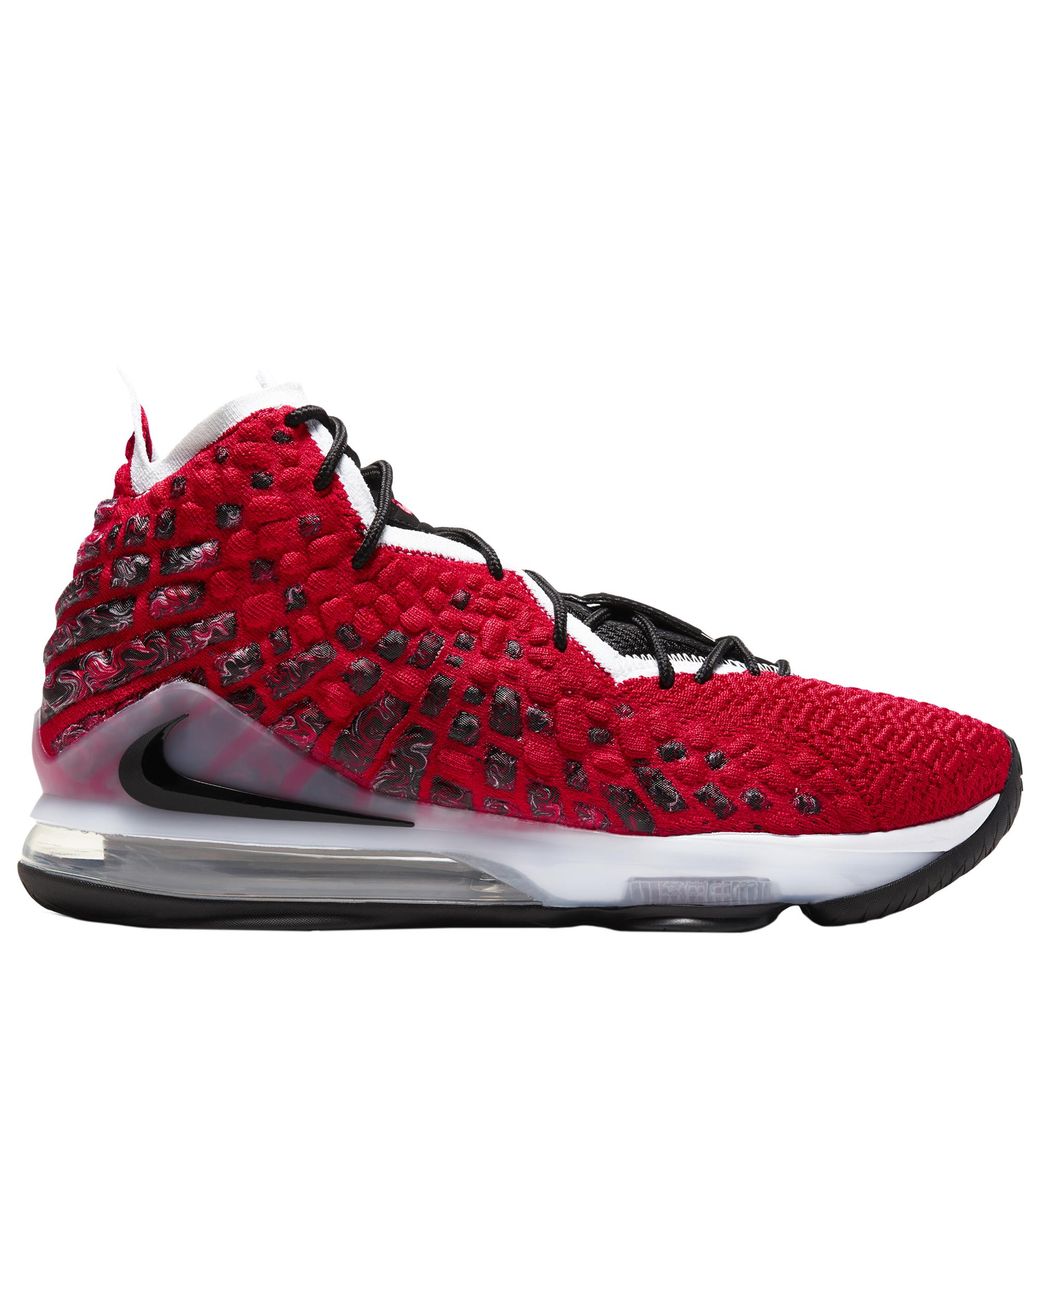 Nike Rubber Lebron 17 Basketball Shoes in University Red/White/Black ...